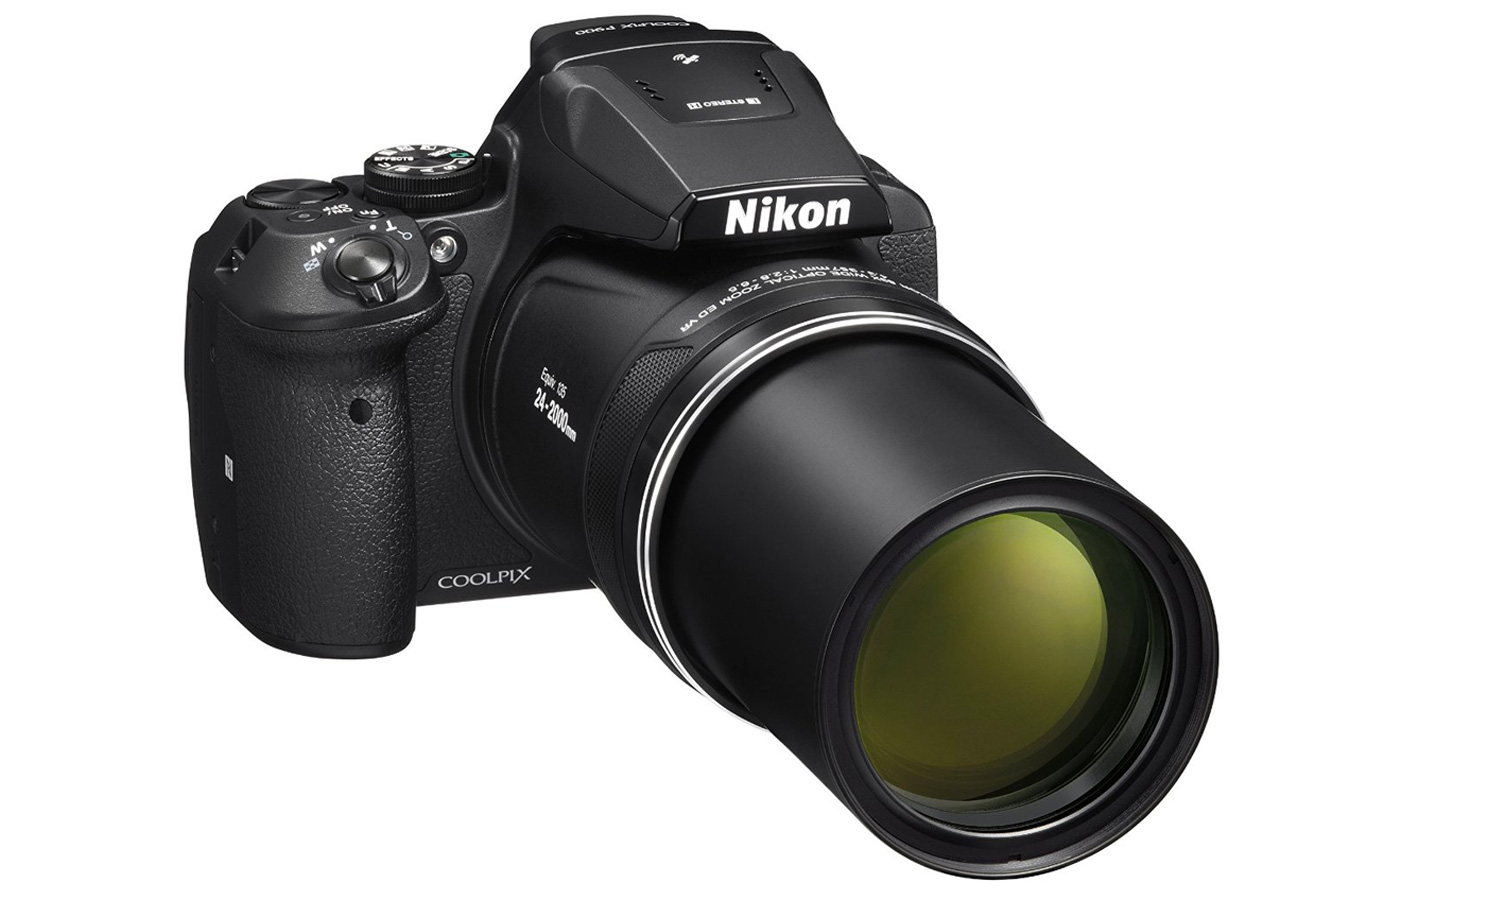 Nikon Coolpix P900 Review: Extreme Close-Up! | Tom's Guide